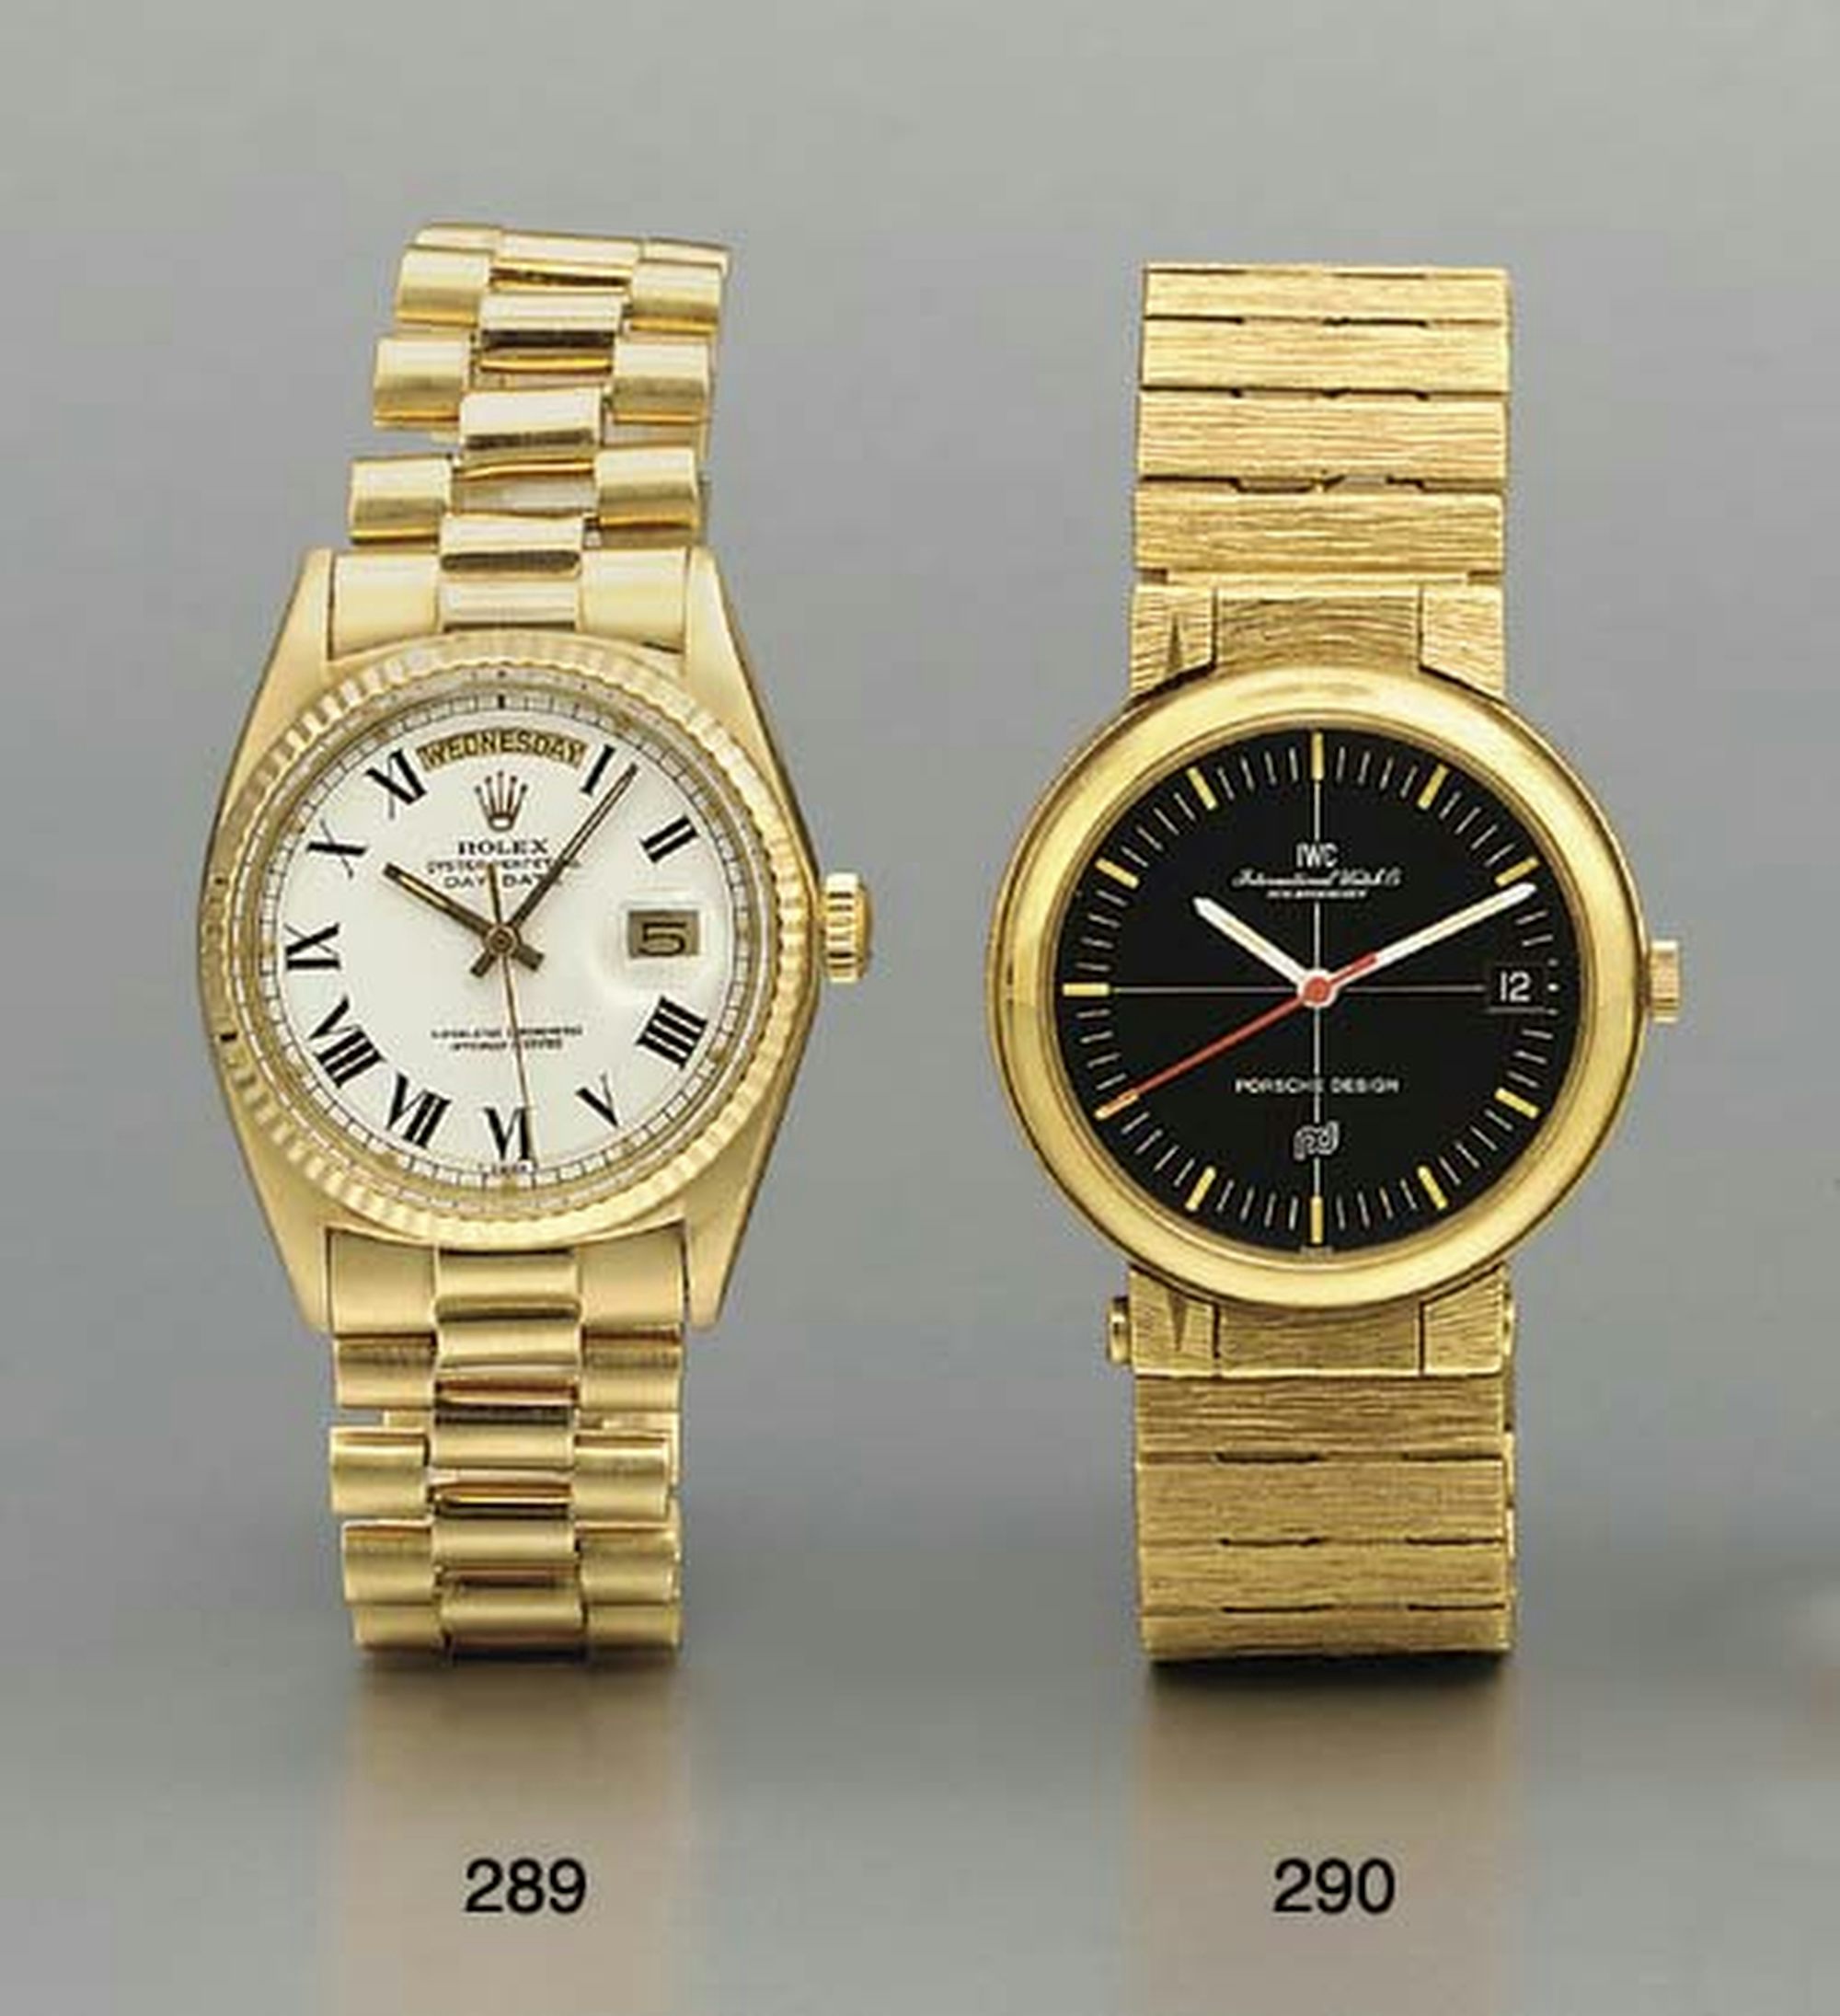 Two watches including a gold IWC Porsche Design Compass Watch.